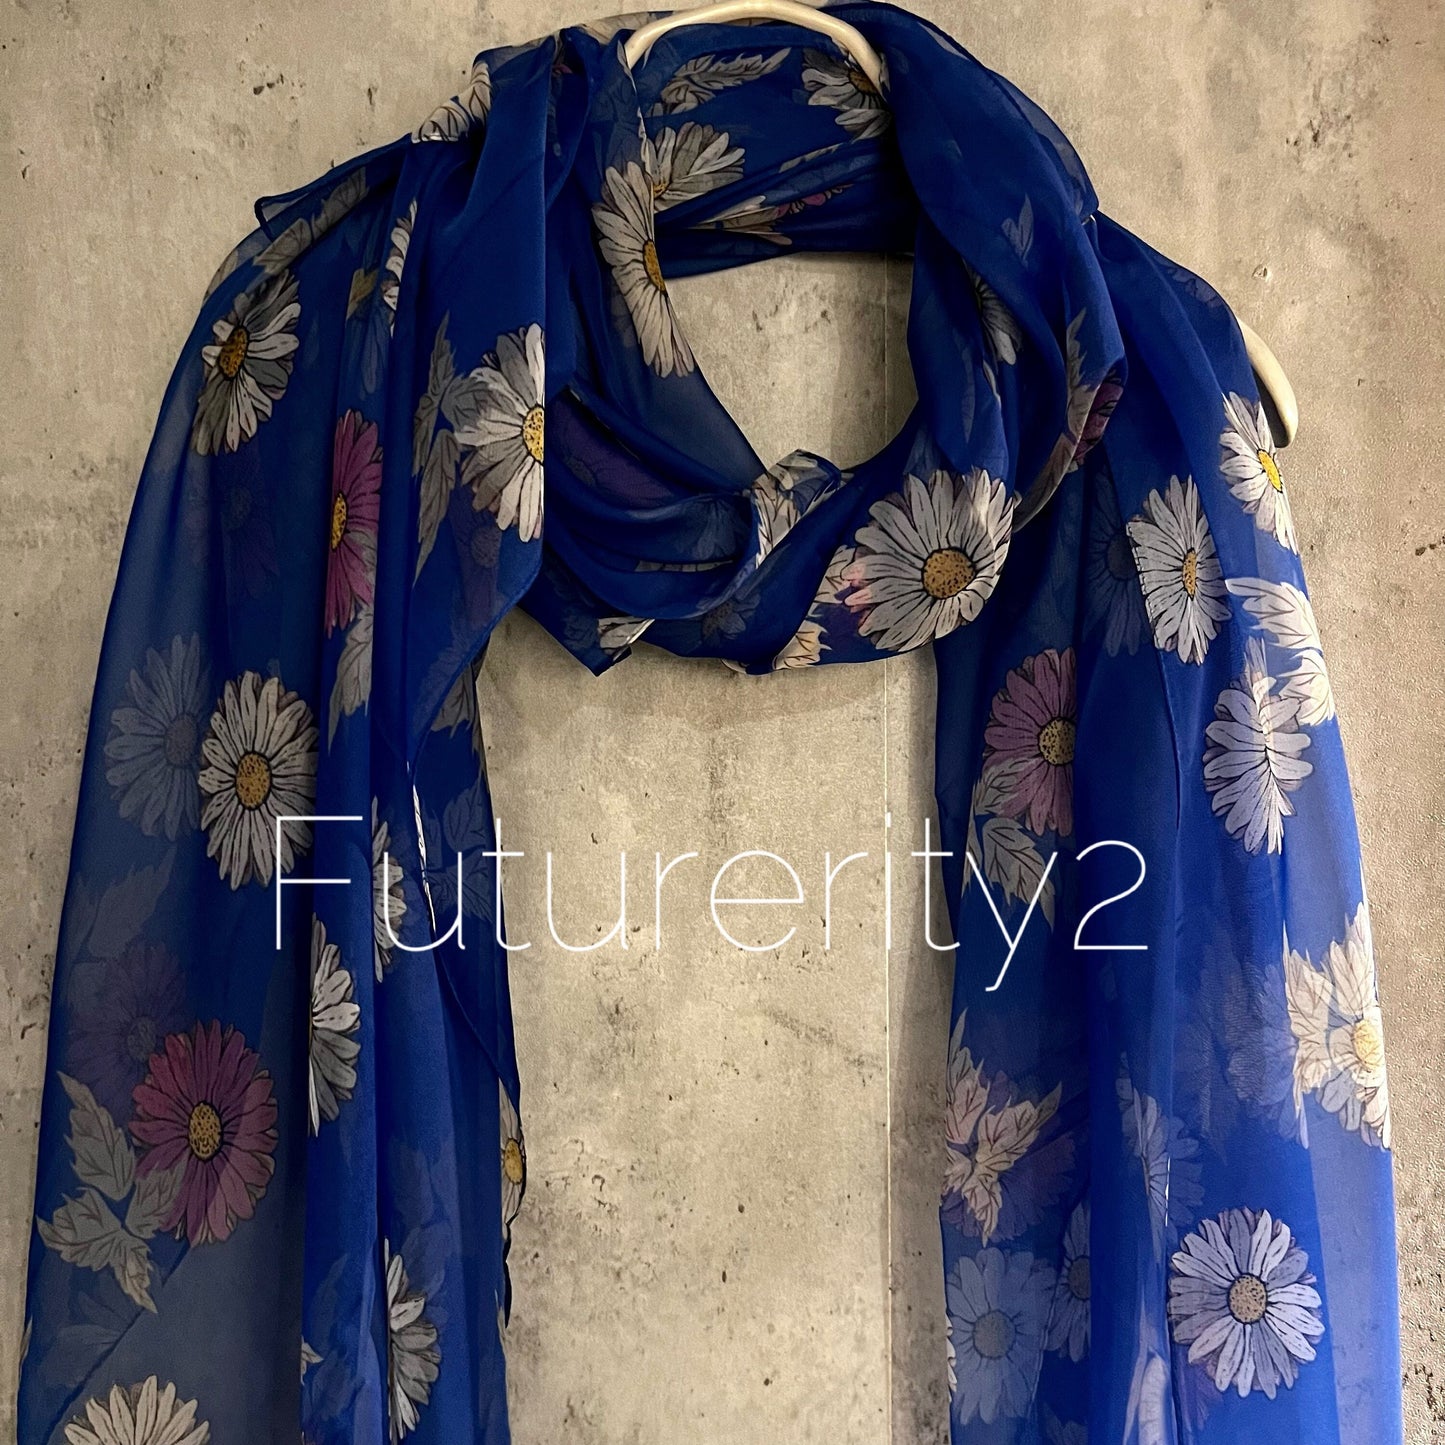 Daisy Flowers Pattern Blue Silk Scarf/Spring Summer Autumn Scarf/Gifts For Her Birthday Christmas/Gifts For Mum/Wedding Scarf/Evening Scarf